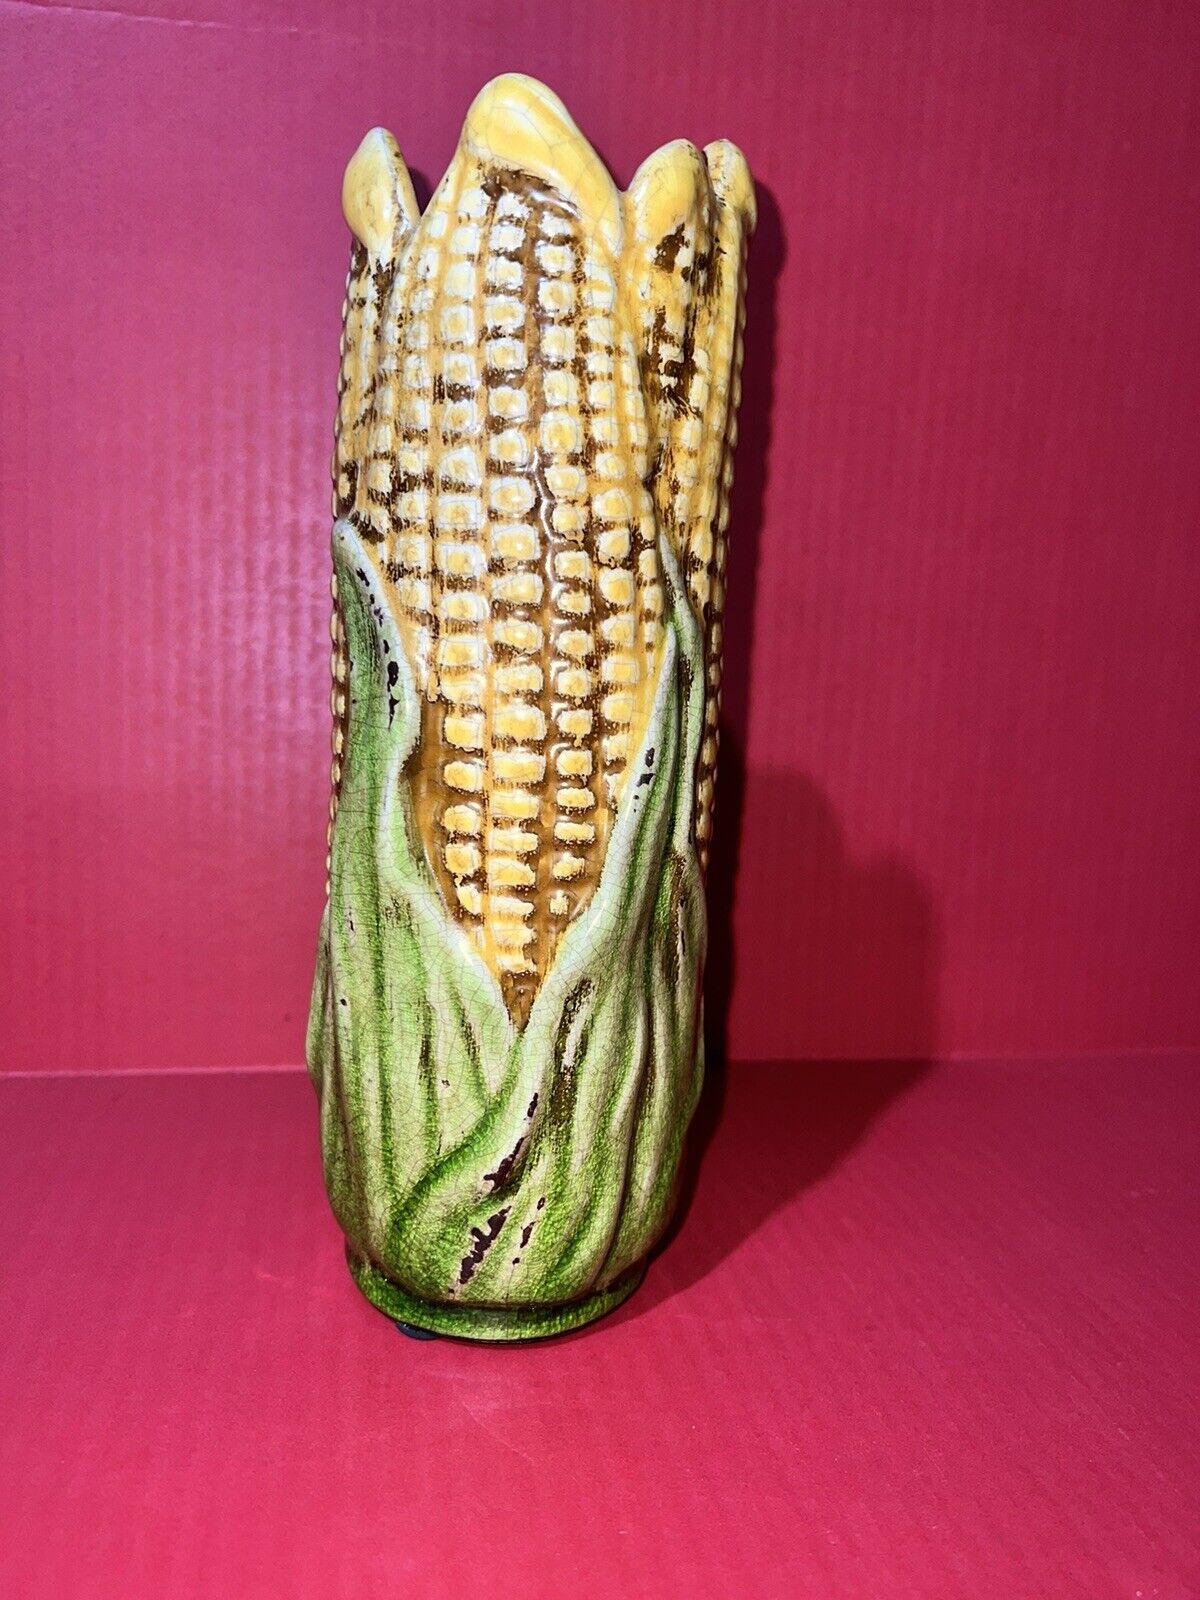 Antique Distressed MAJOLICA Corn on The Cob Vase 9” Tall Excellent Condition